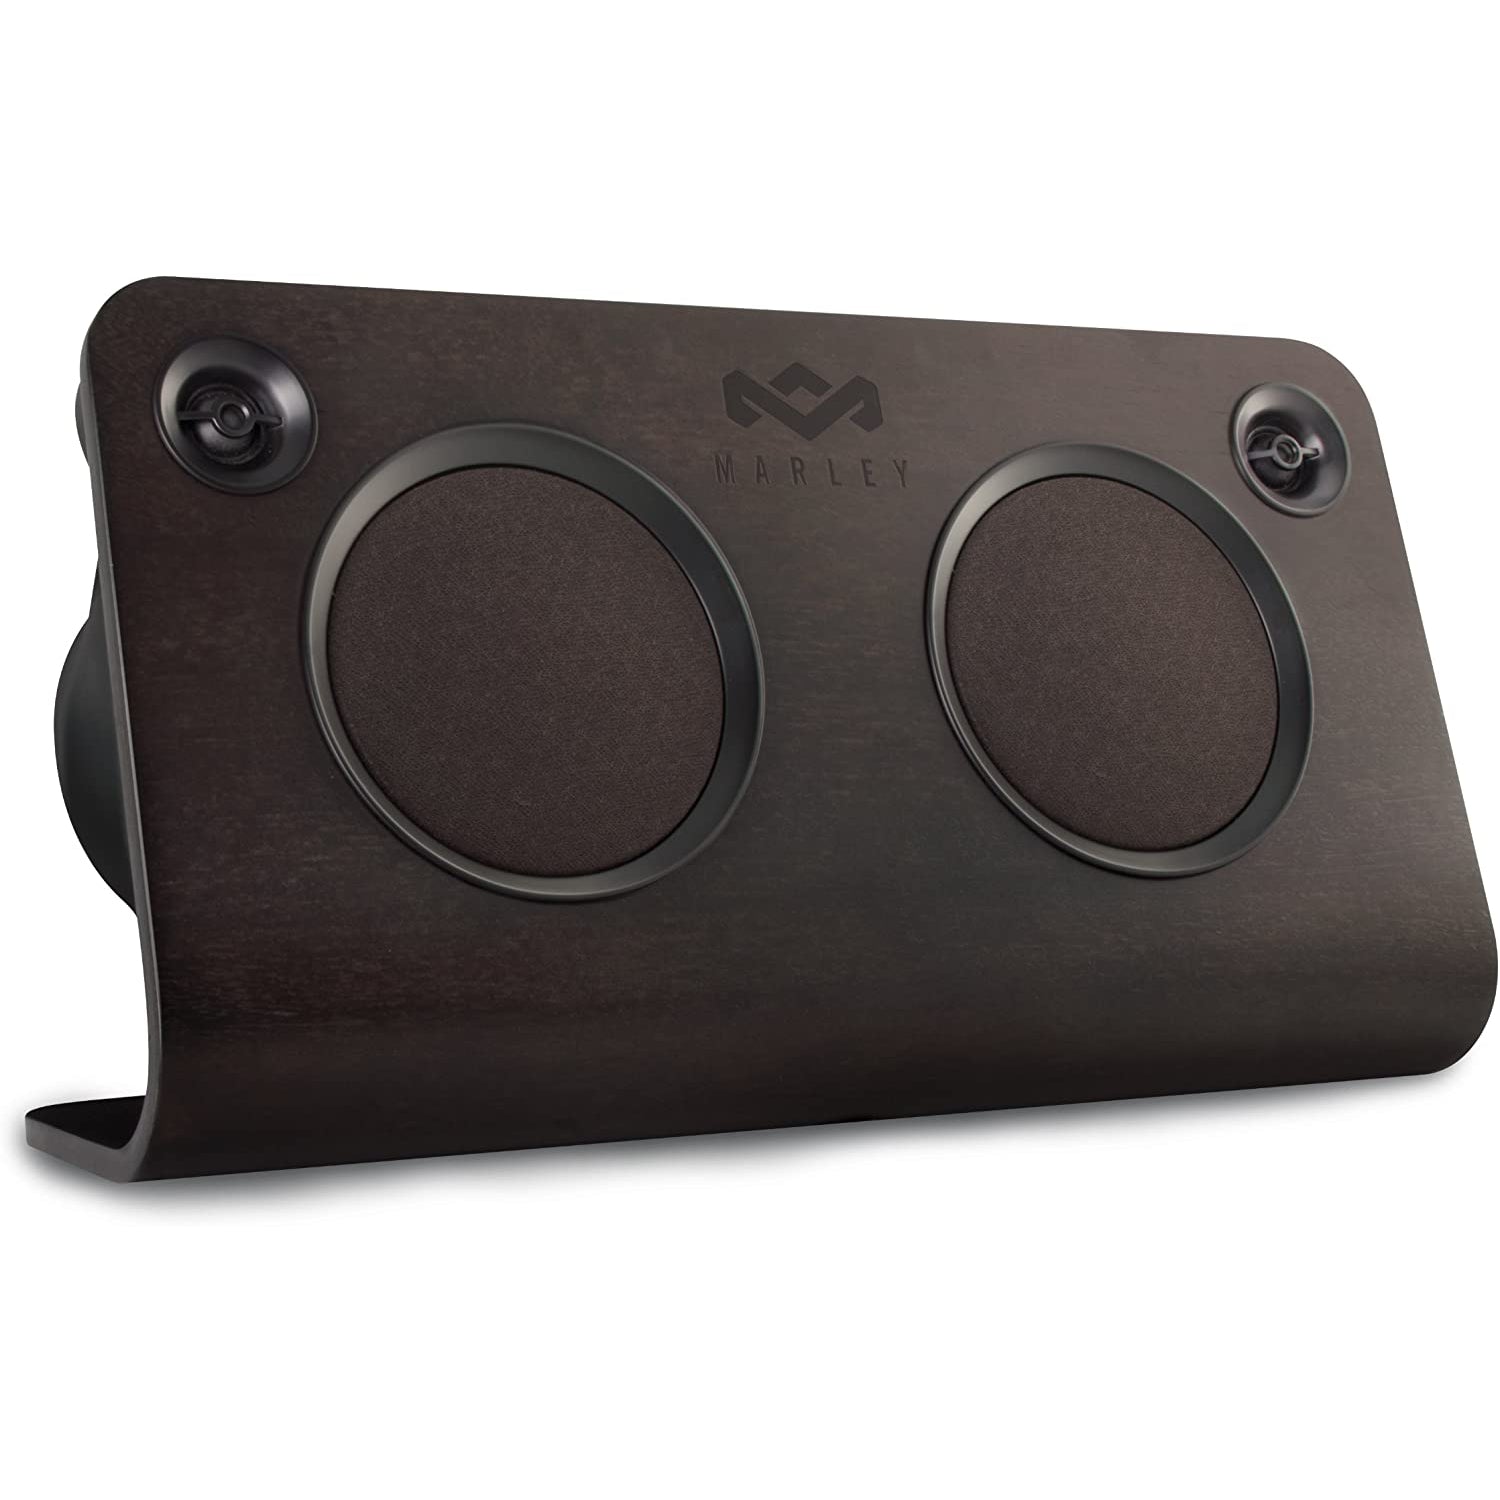 House of Marley Get Up Stand Up Bluetooth Speaker, Brown